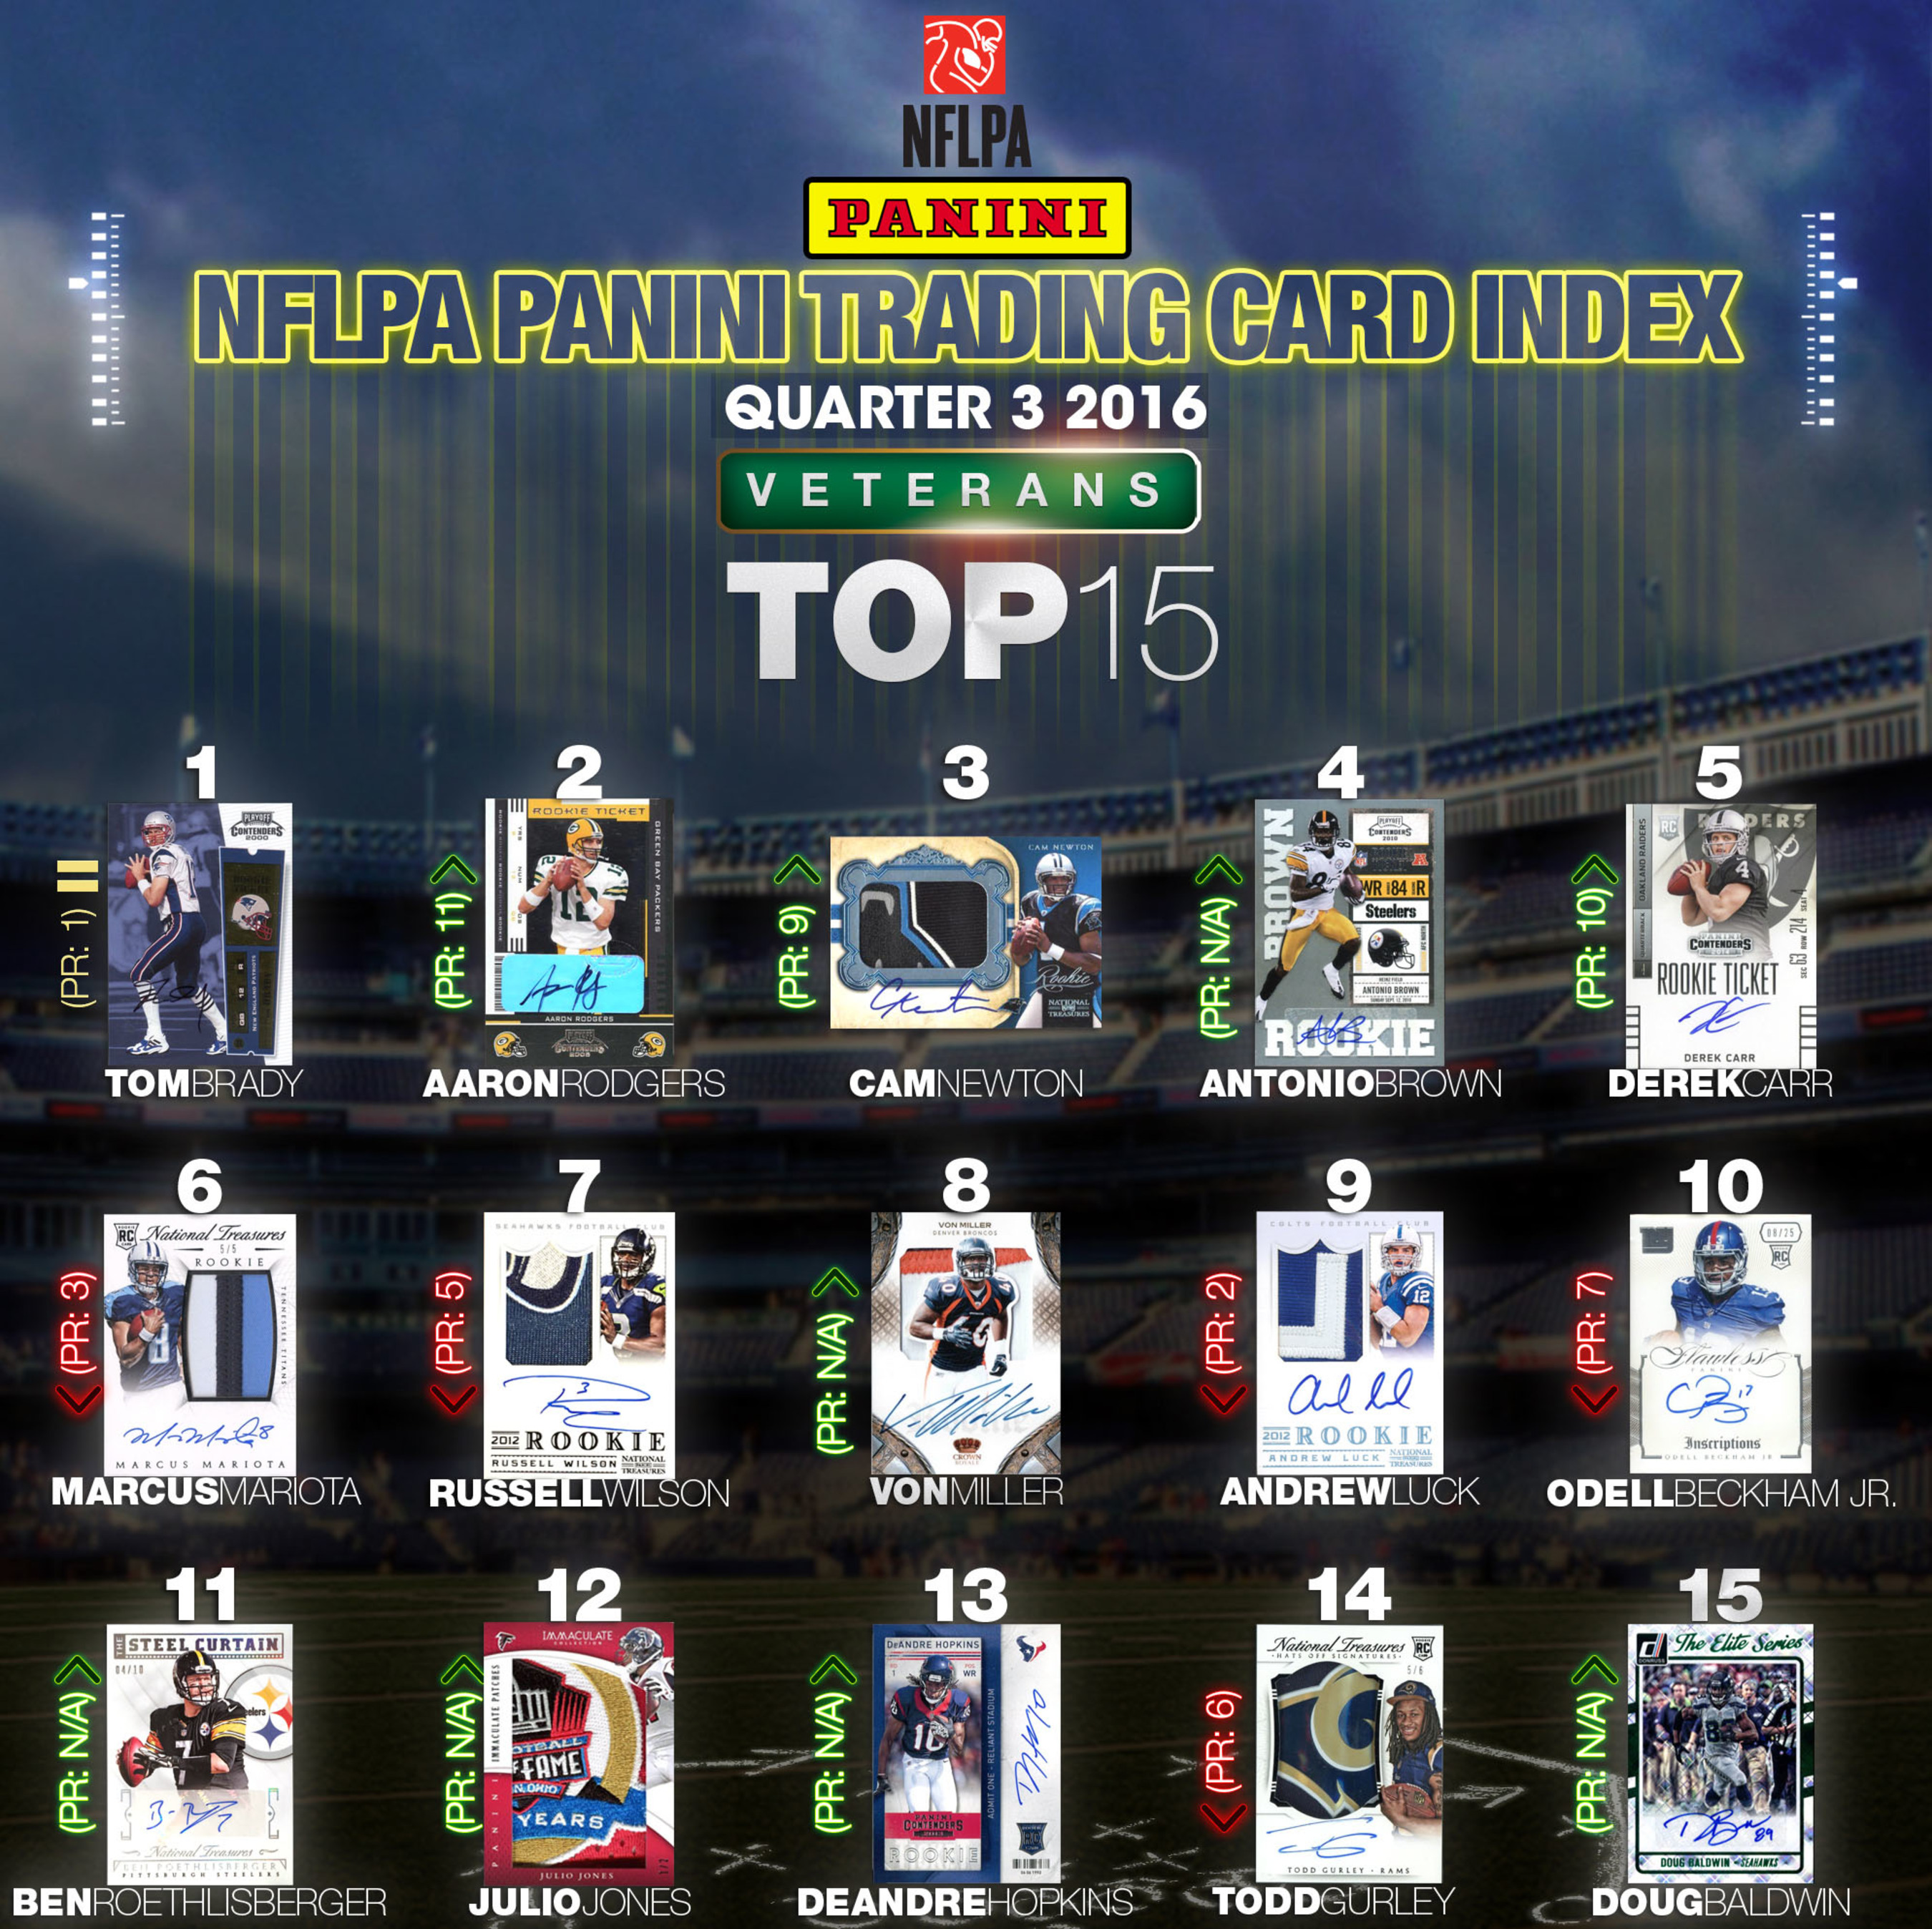 NFC East Rookies Lead the Way in Latest NFLPA Panini Trading Card Index.